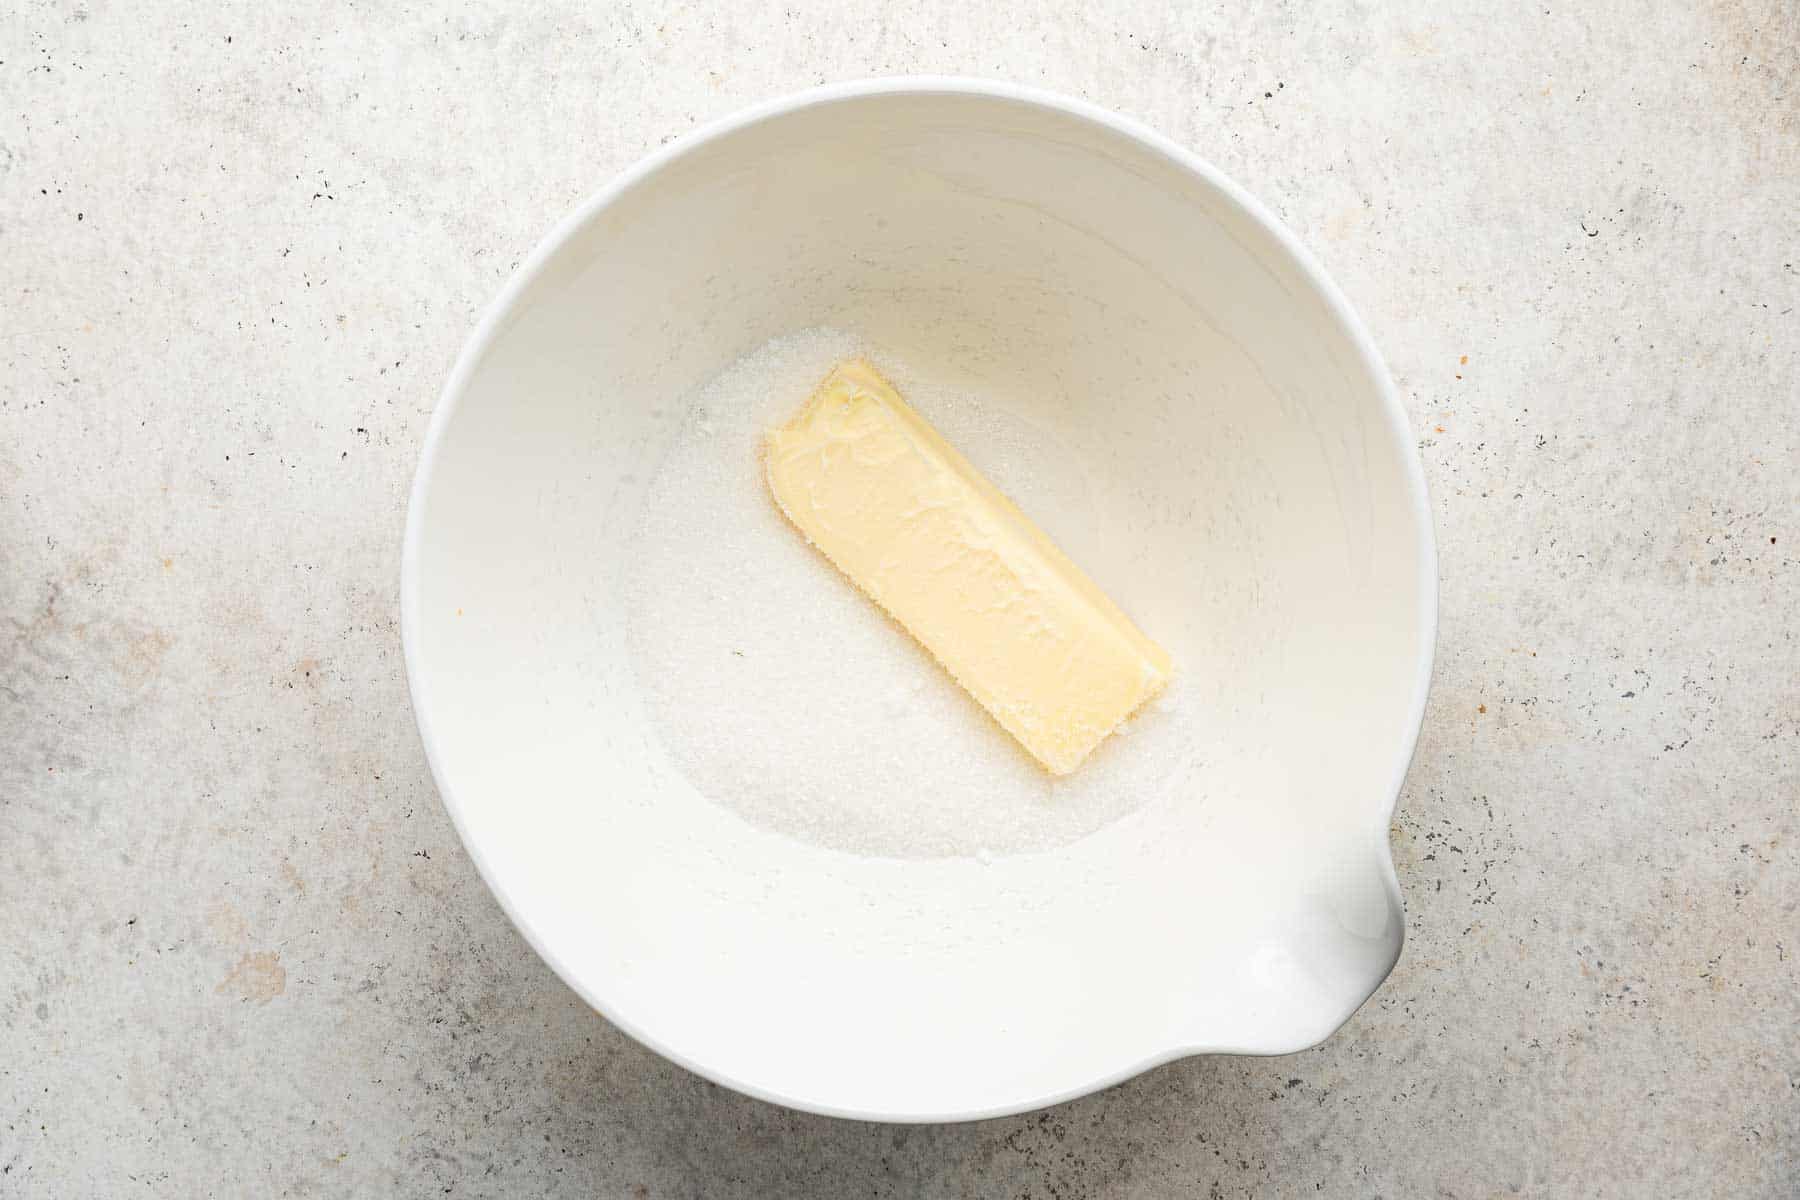 One stick of butter on top of granulated sugar in a white bowl.